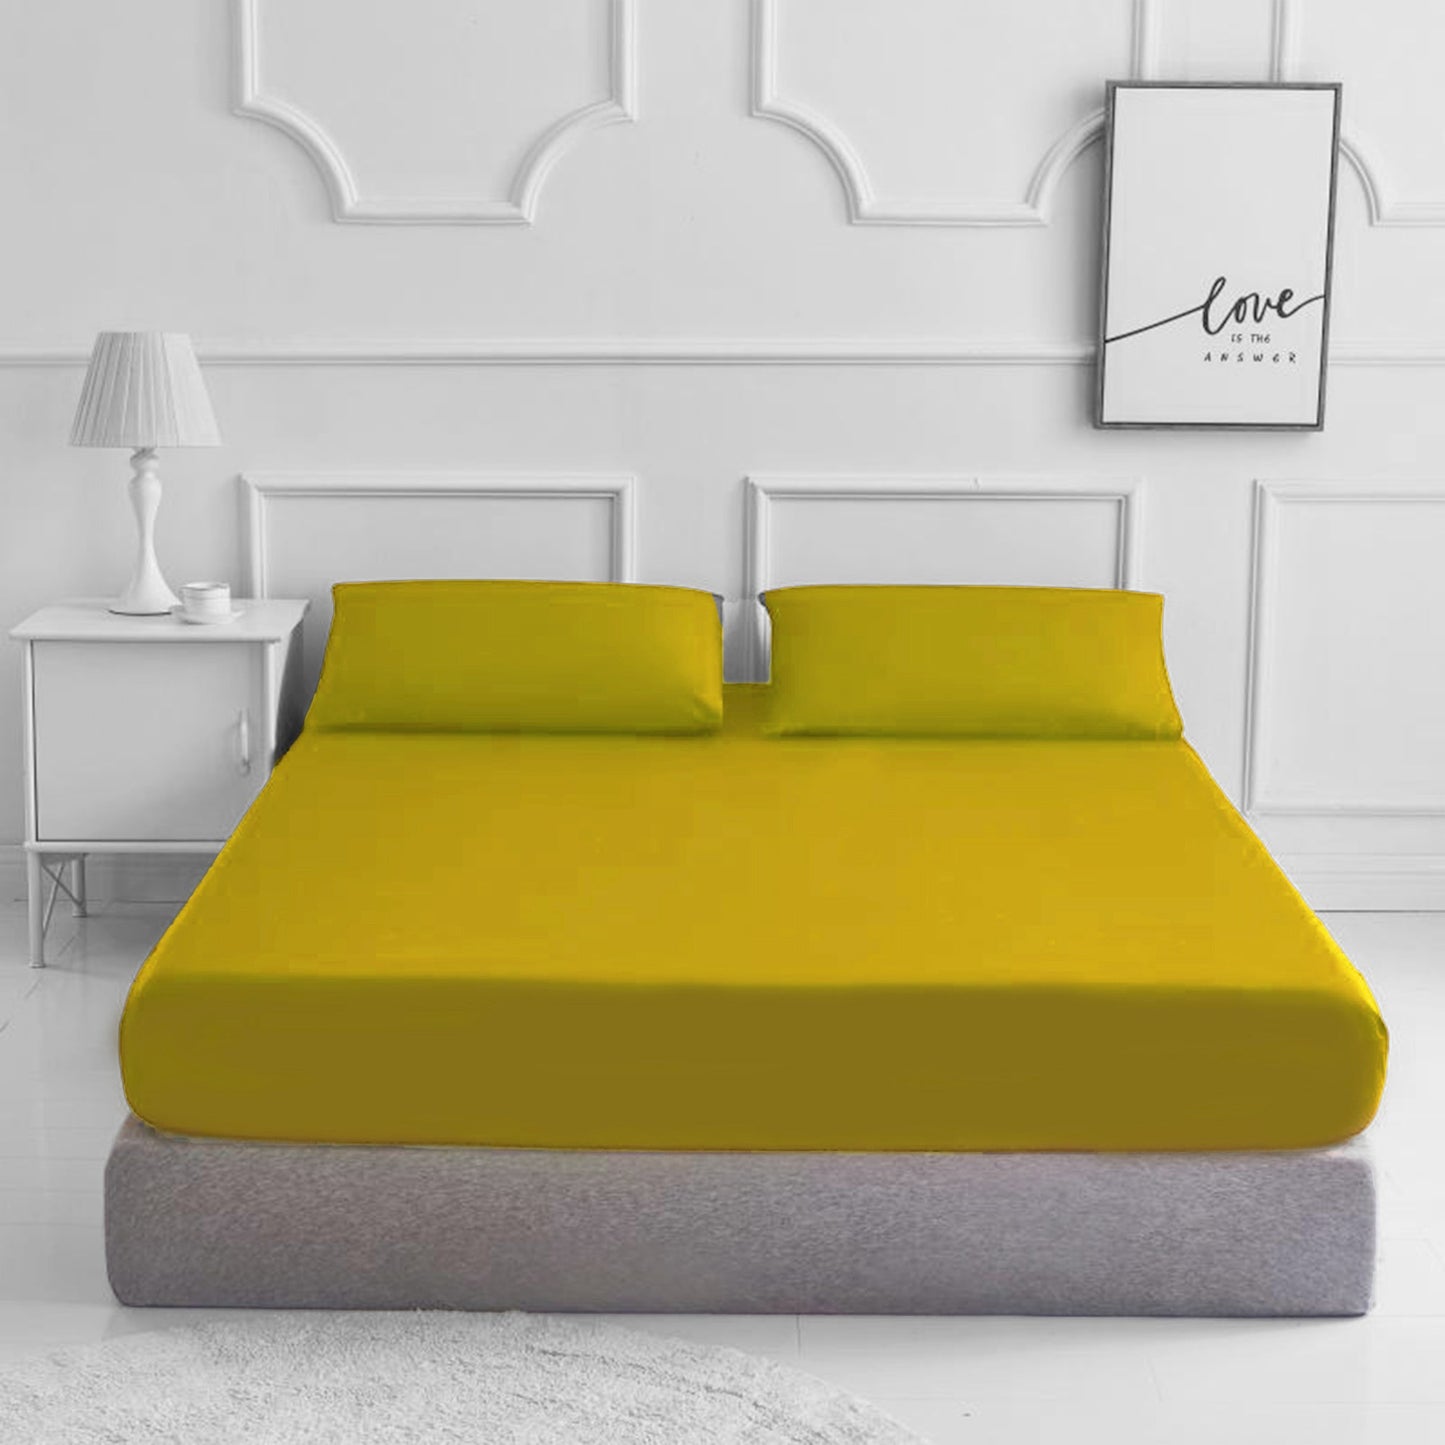 Fitted Bed Sheet Matching FREE 2 X PILLOW CASE Plain Dyed - TheComfortshop.co.ukBed Sheets0721718963585thecomfortshopTheComfortshop.co.ukPC FIT FREE PP Mustard KingMustardKingFitted Bed Sheet Matching FREE 2 X PILLOW CASE Plain Dyed - TheComfortshop.co.uk